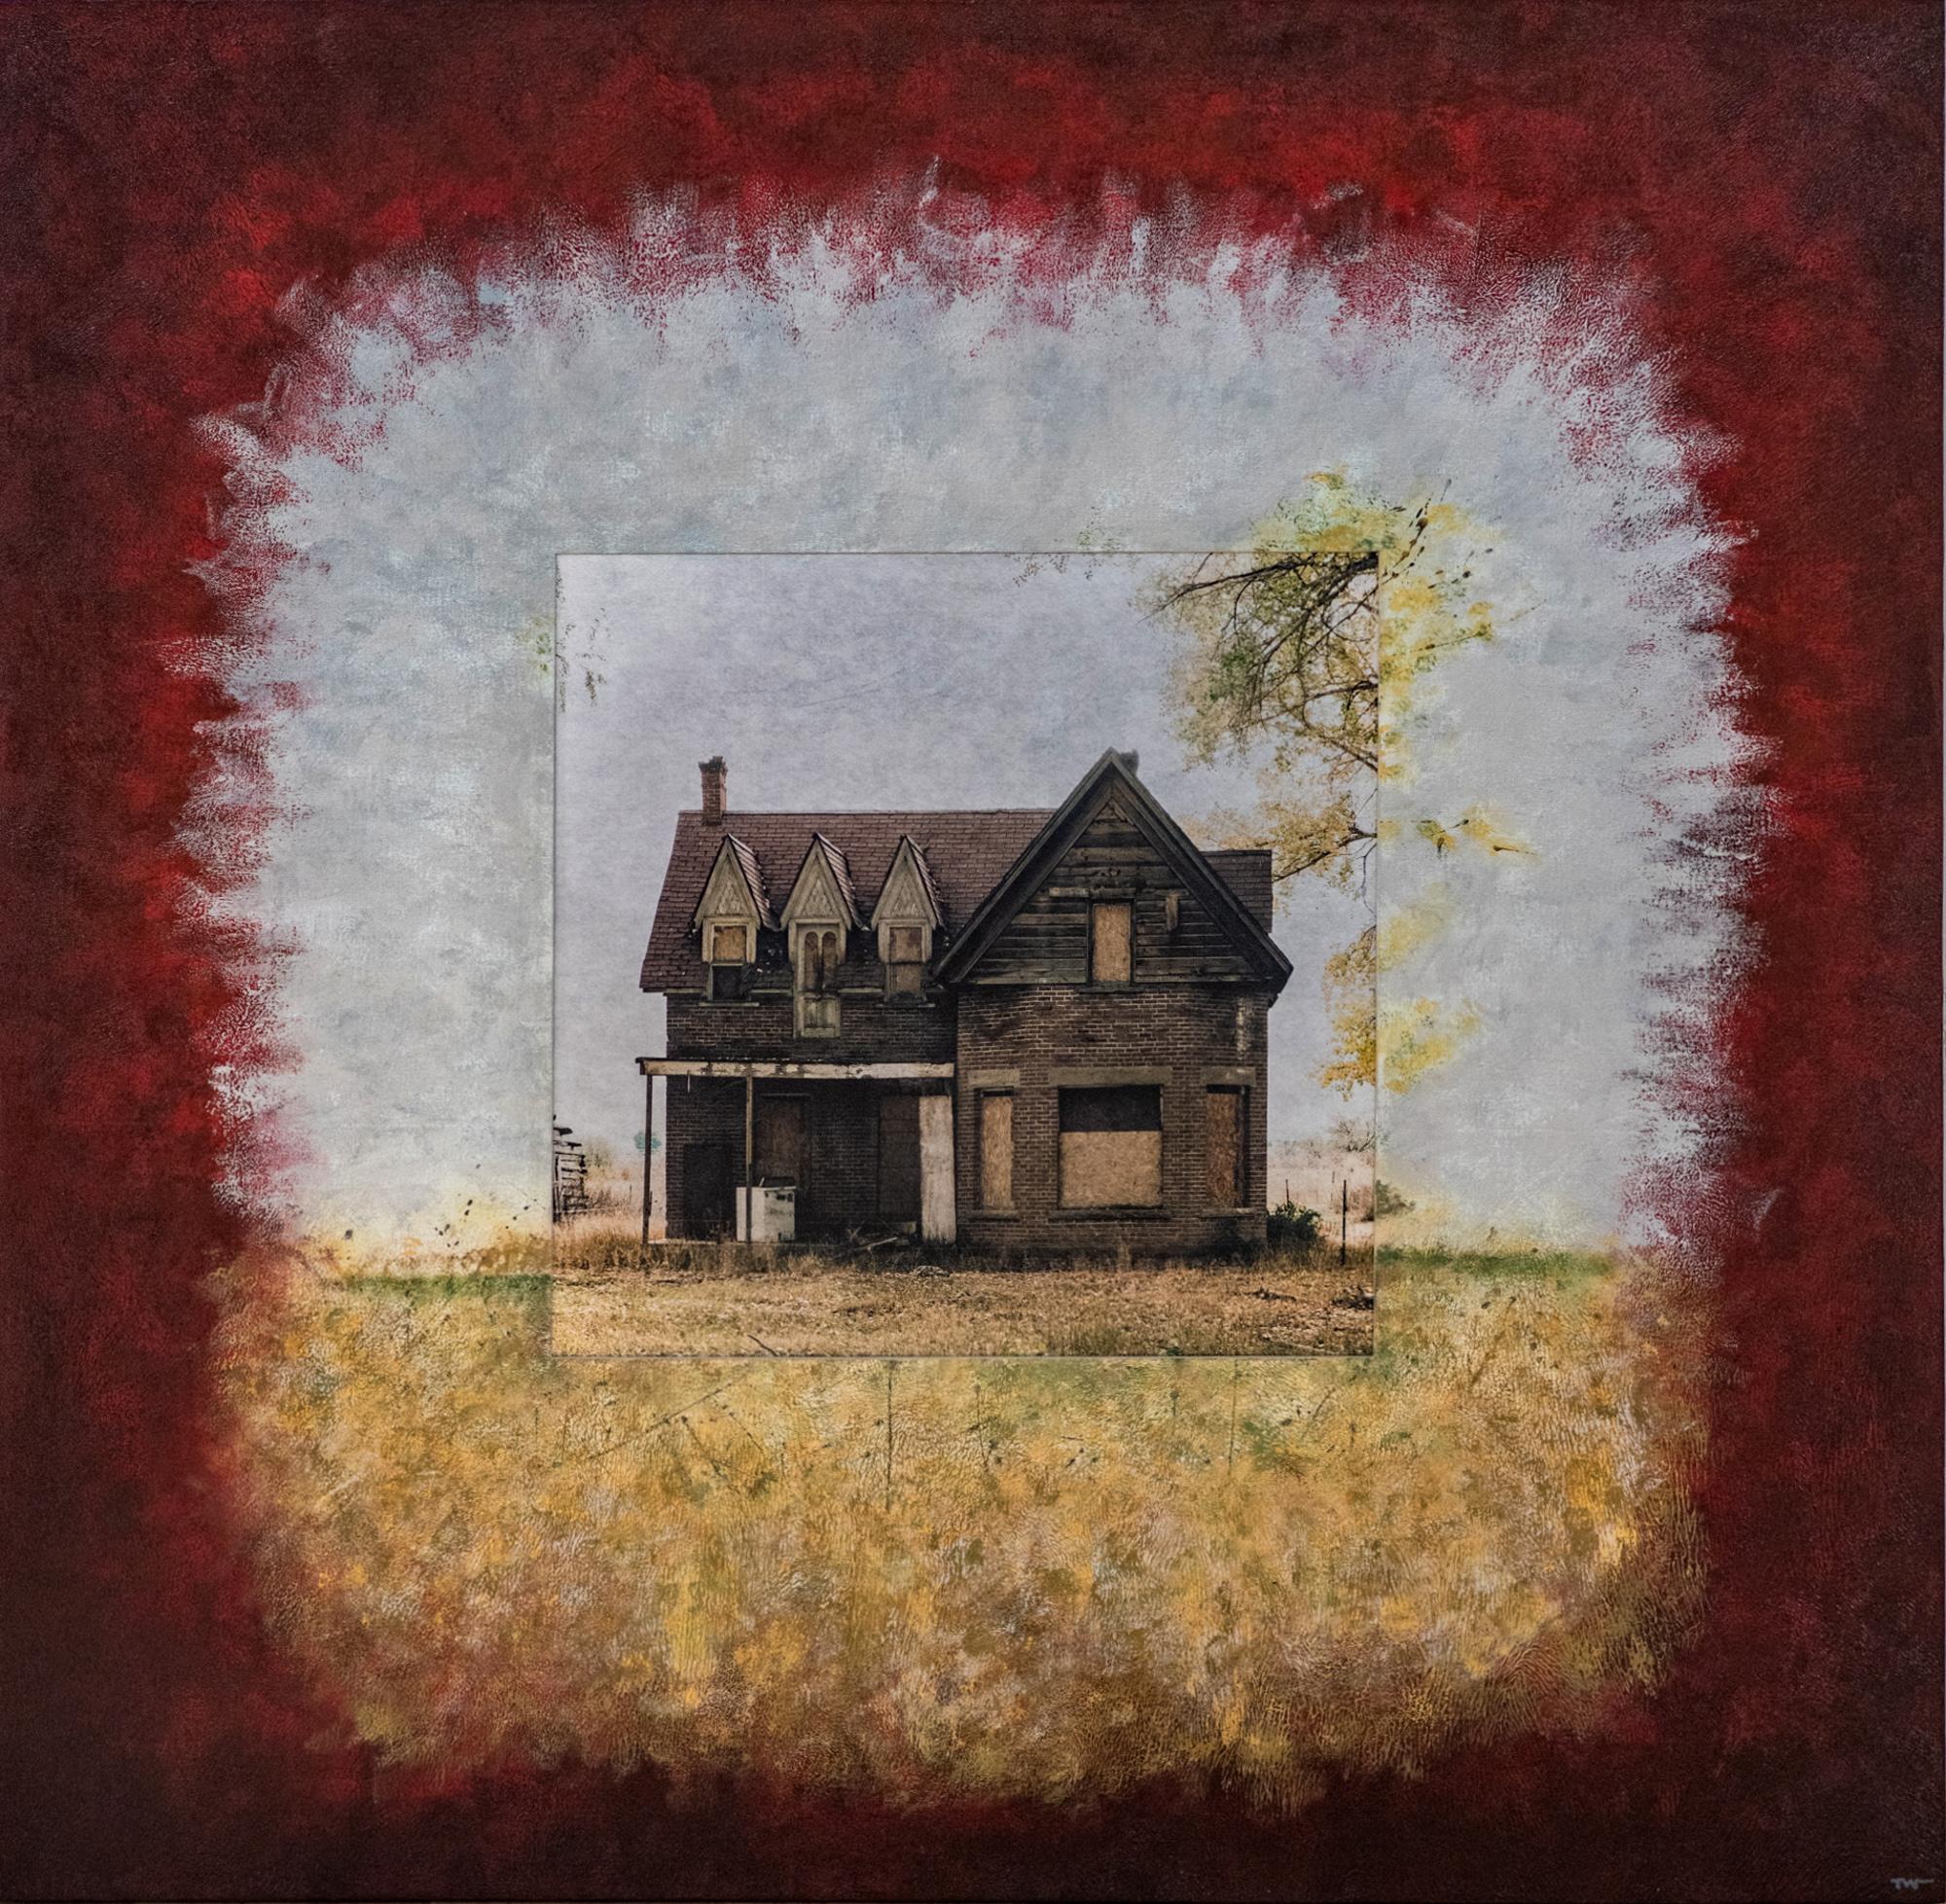 The House At The End Of The Lane - Mixed Media Art by Timothy White